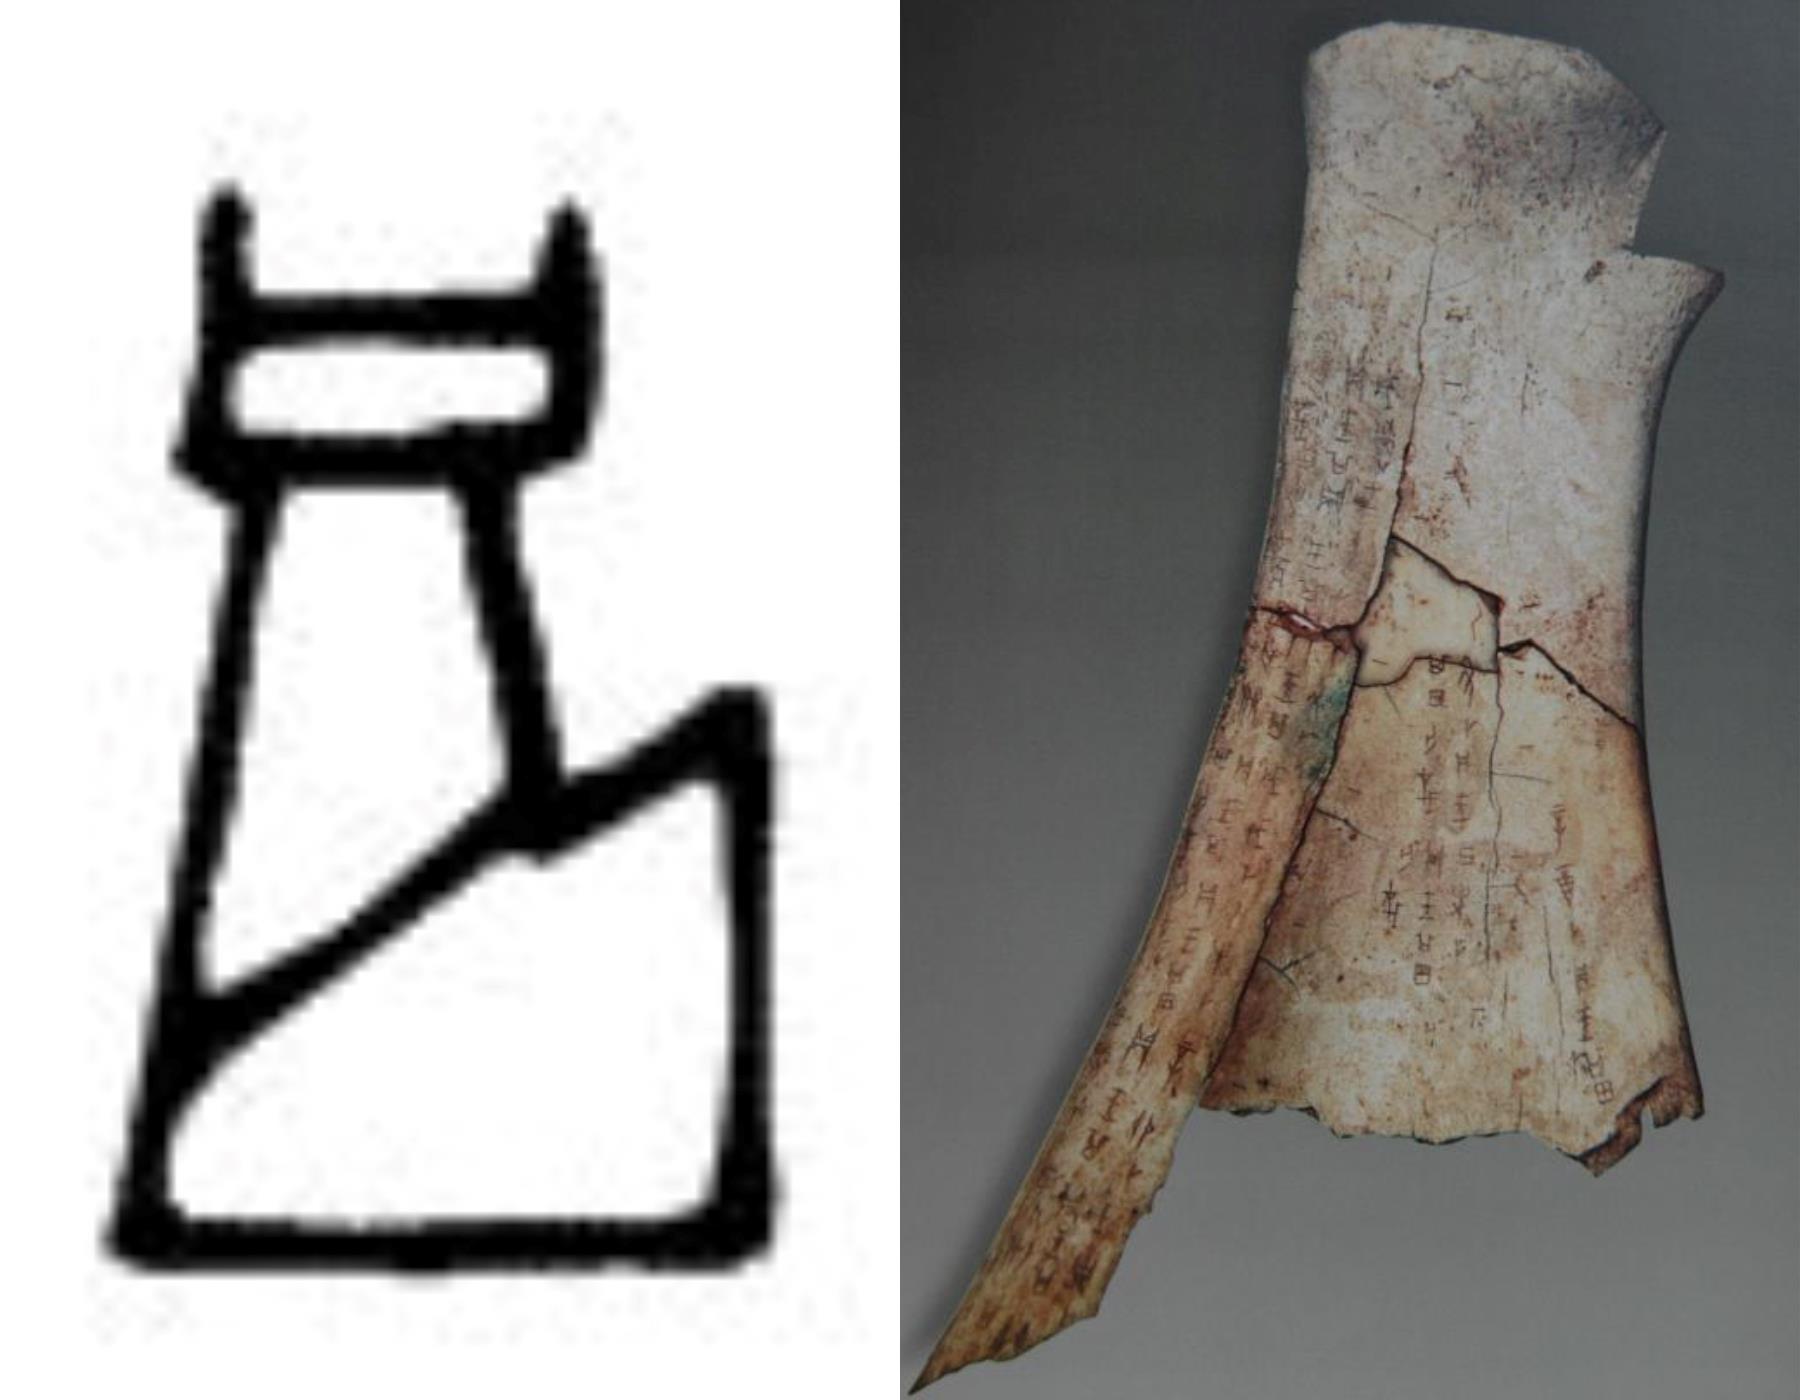 An oracle bone resembling the character for 